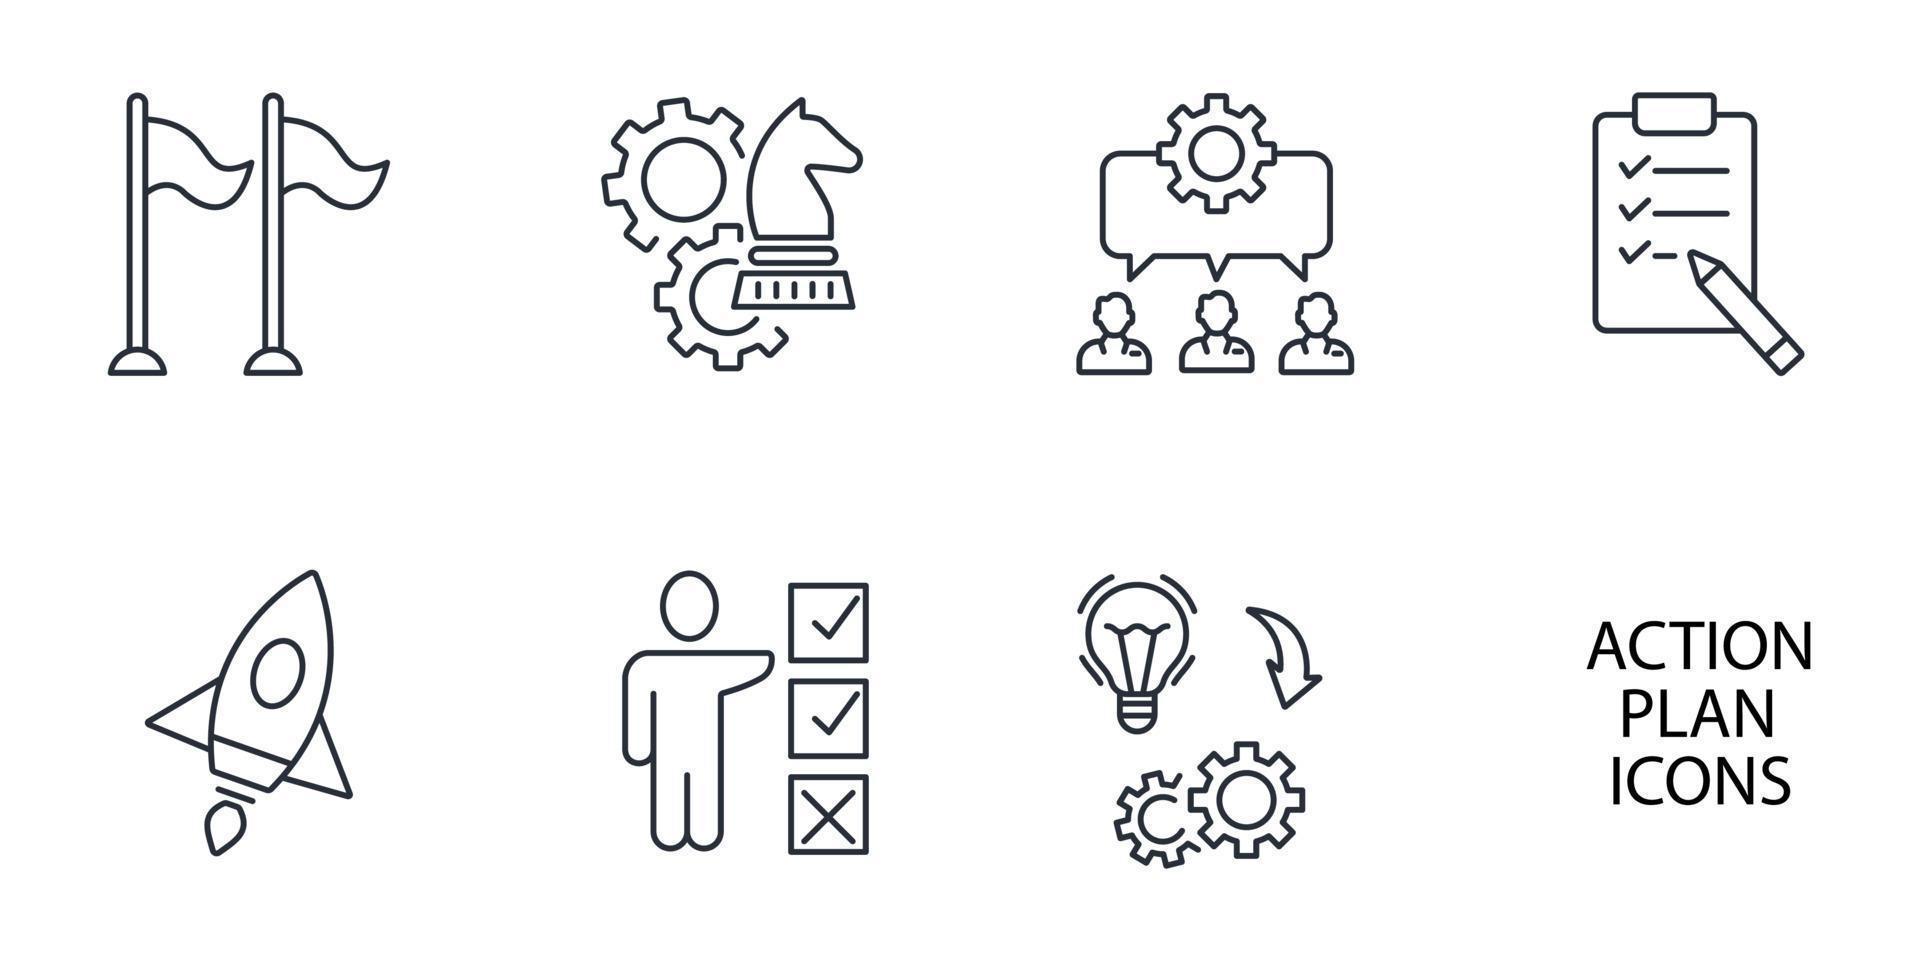 action plan icons set . action plan with pack symbol vector elements for infographic web